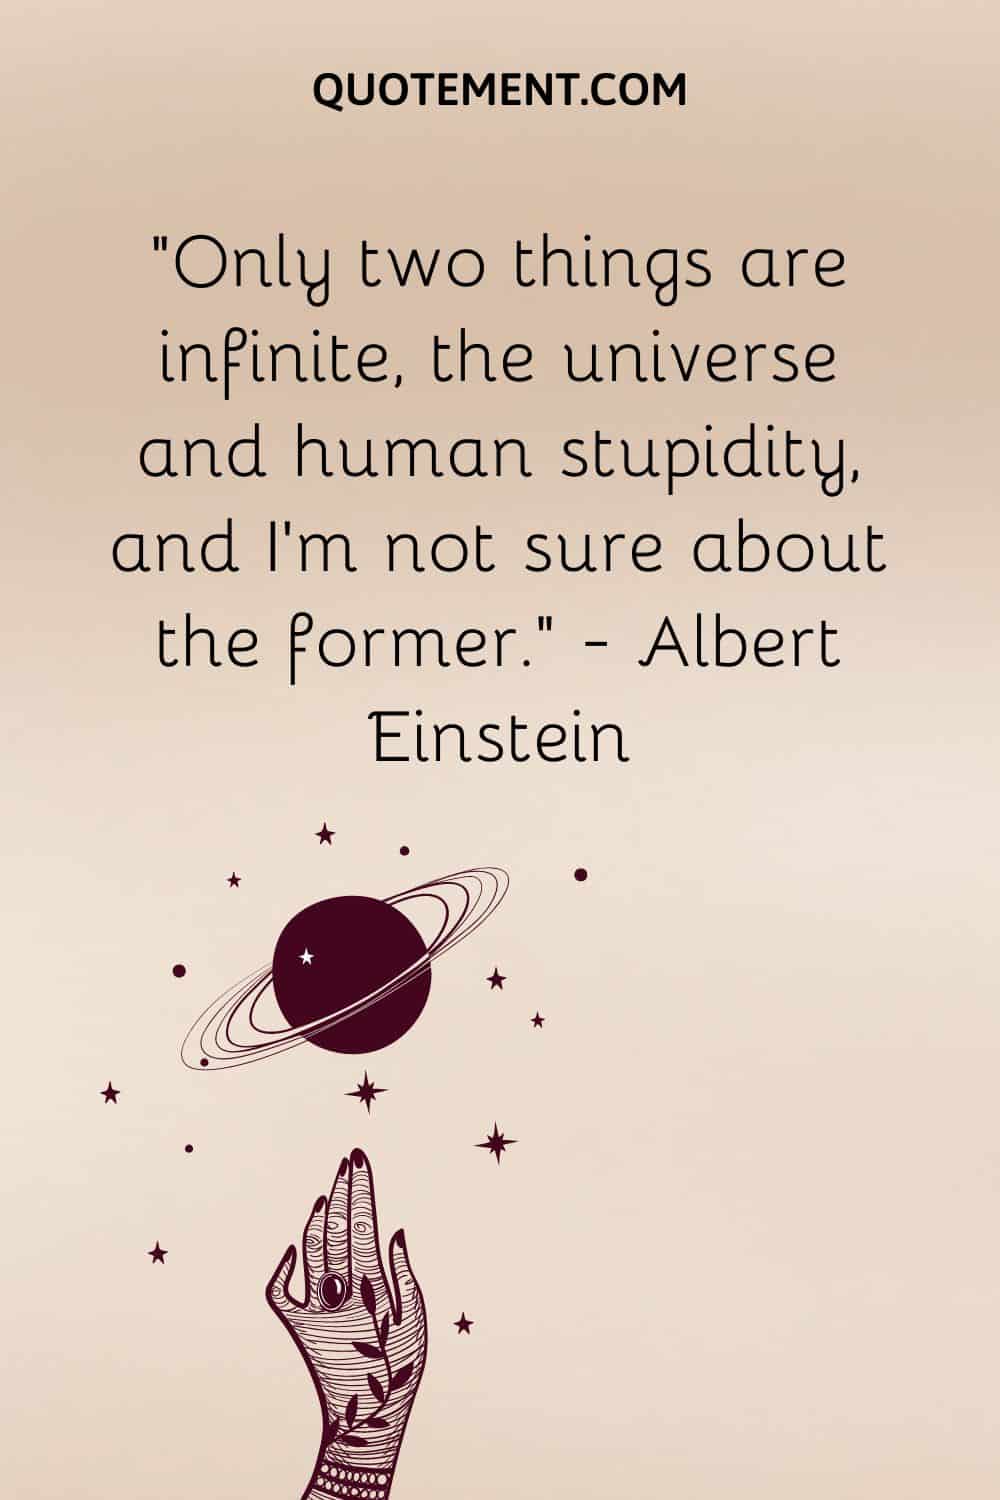 Only two things are infinite, the universe and human stupidity, and I’m not sure about the former